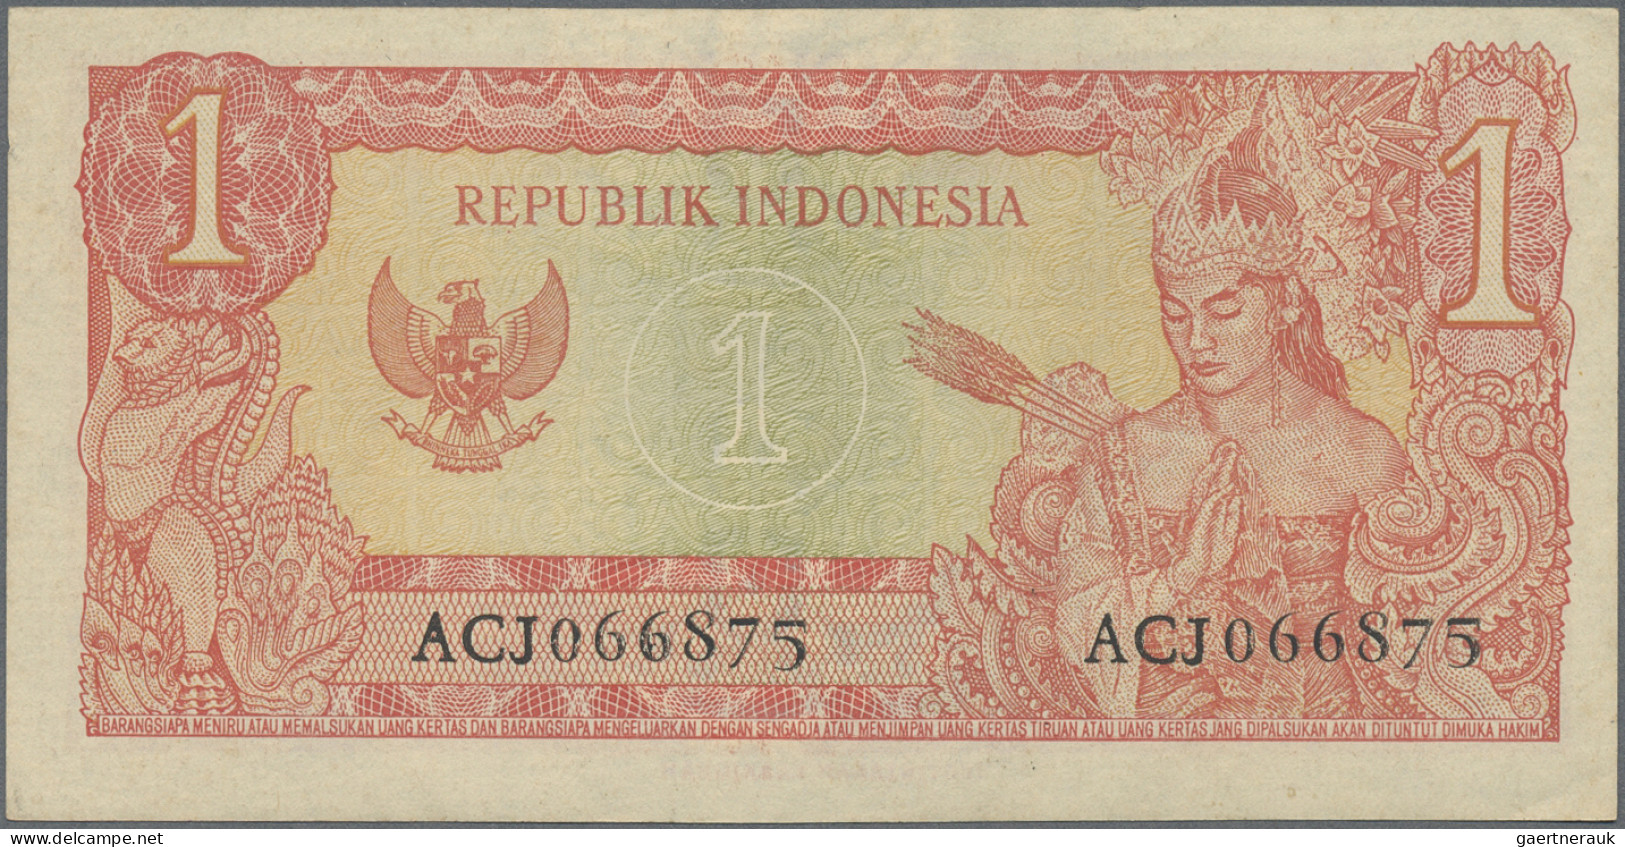 Indonesia: Republic Indonesia, huge lot with 17 banknotes 1 and 2.5 Rupiah, seri